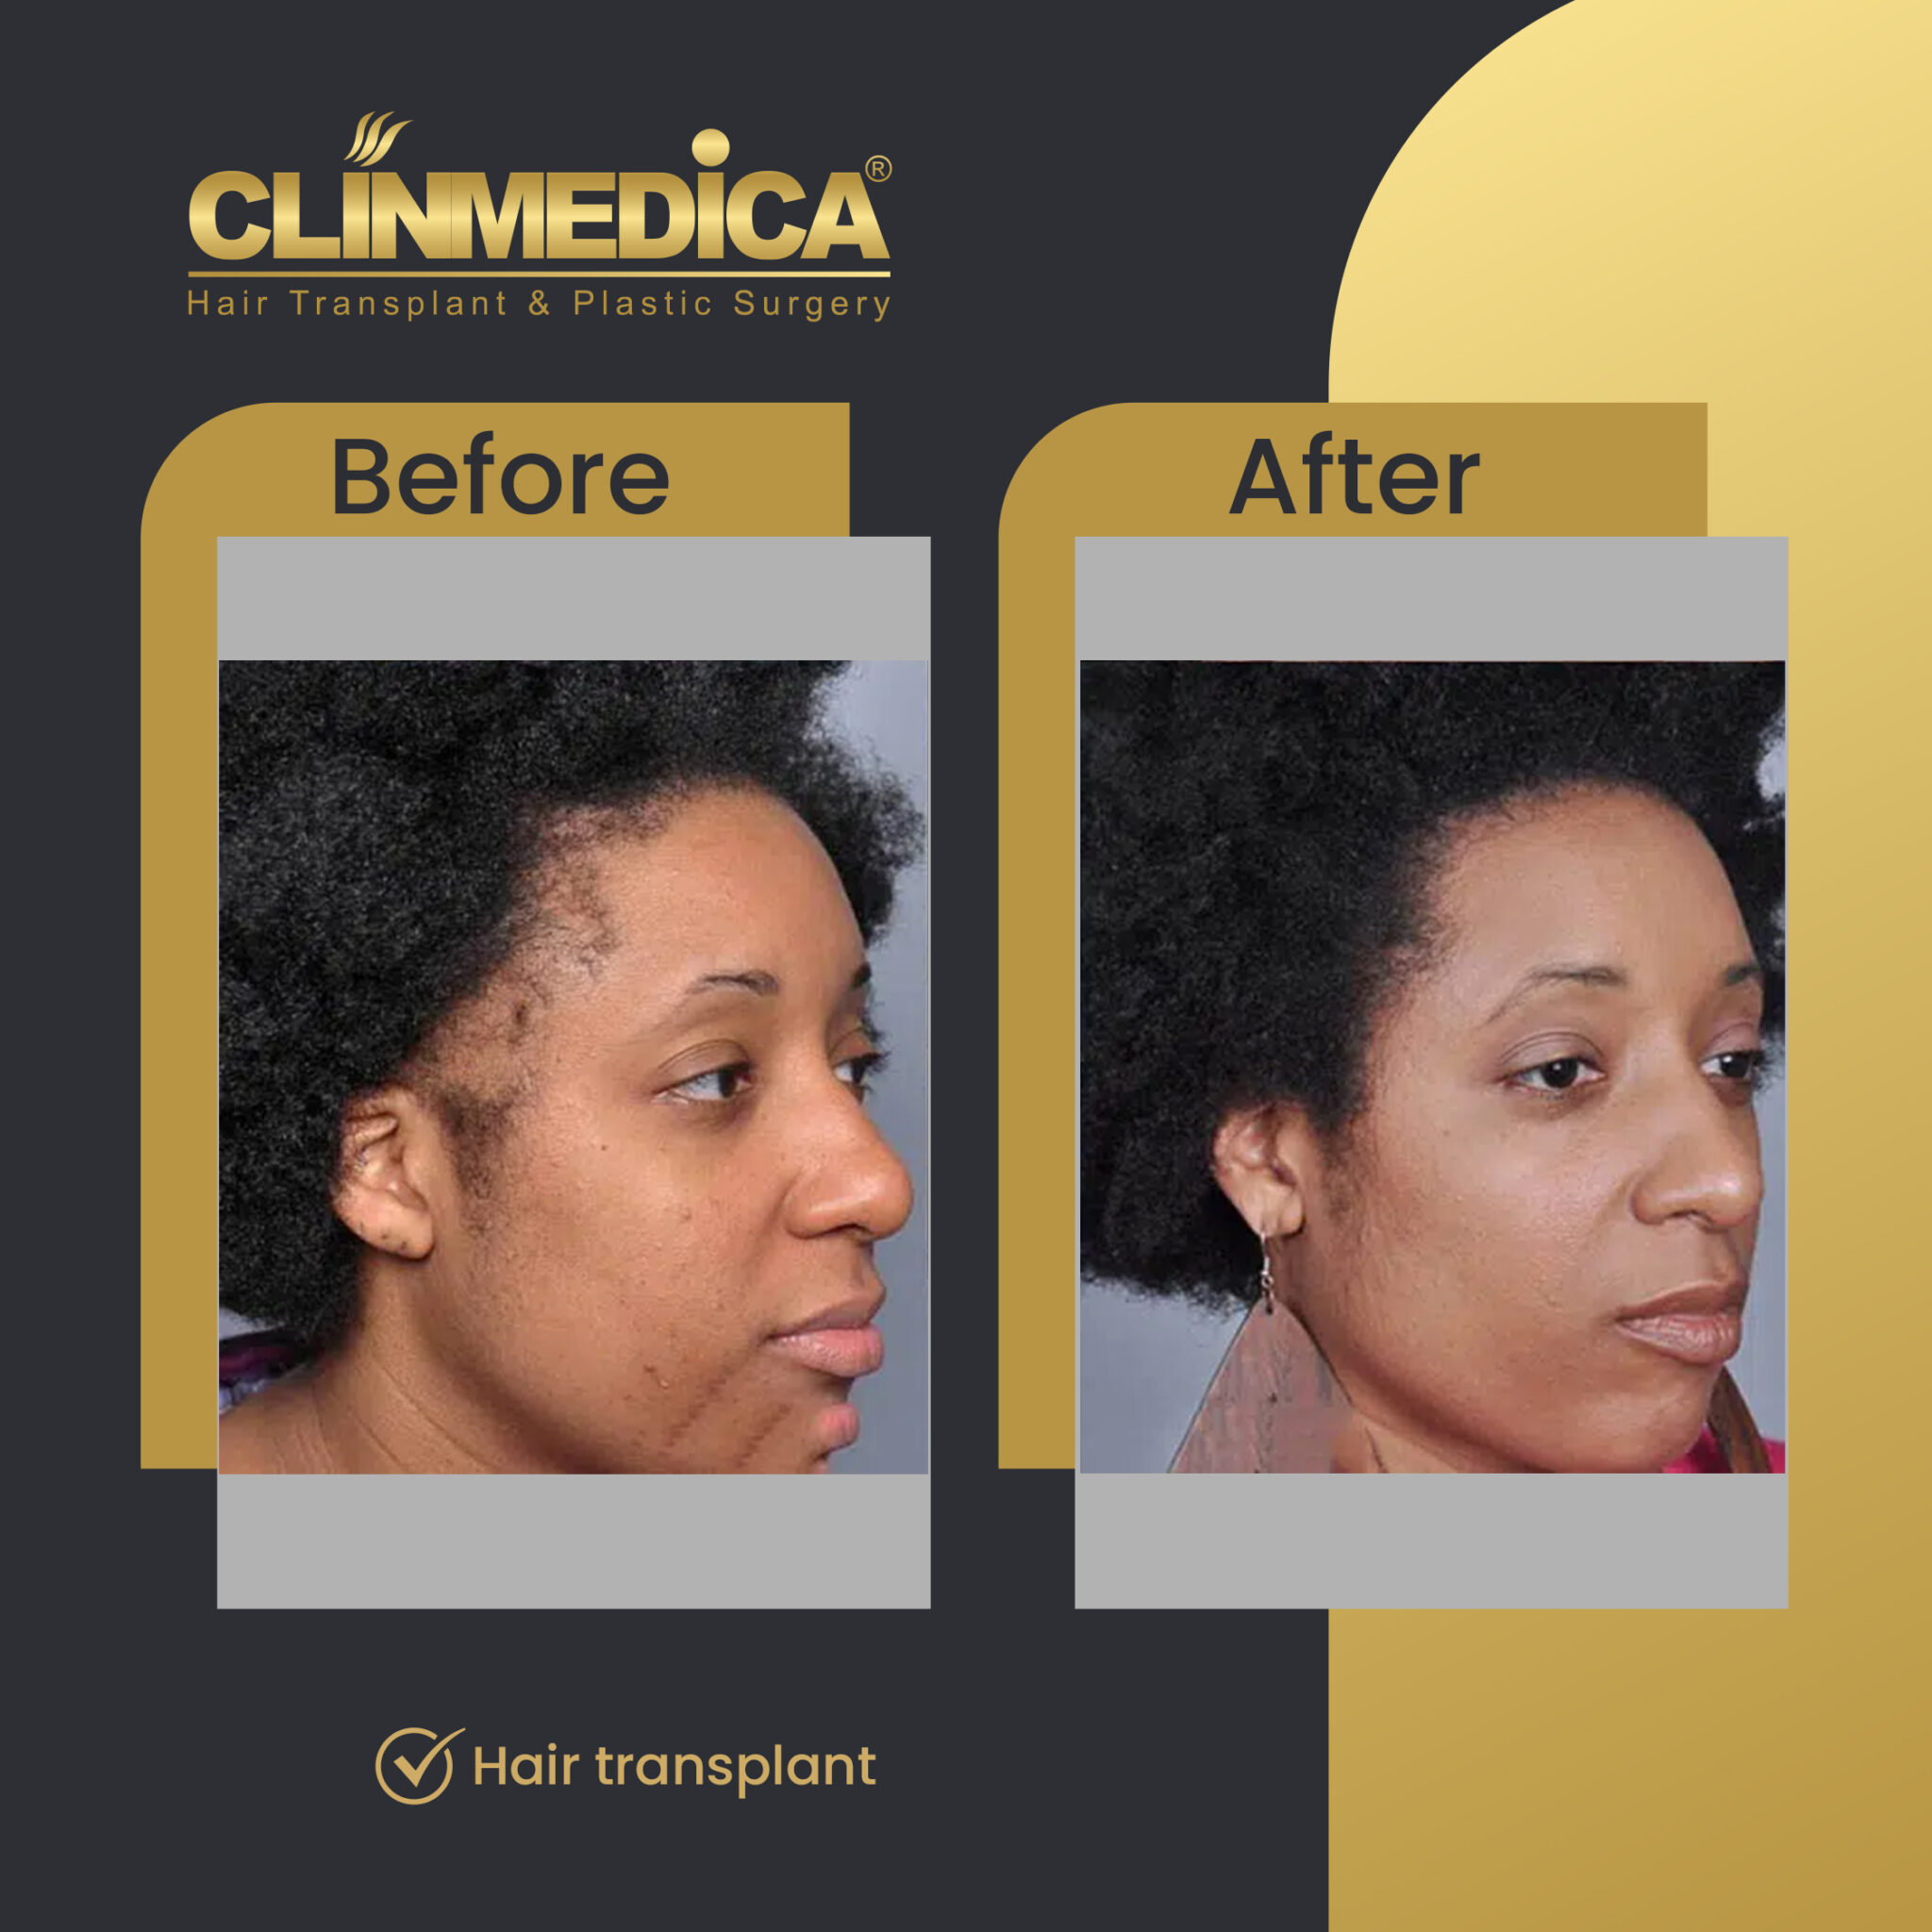 Afro-Hair-Transplant-for-women-Before-&-After-clinmedica-09